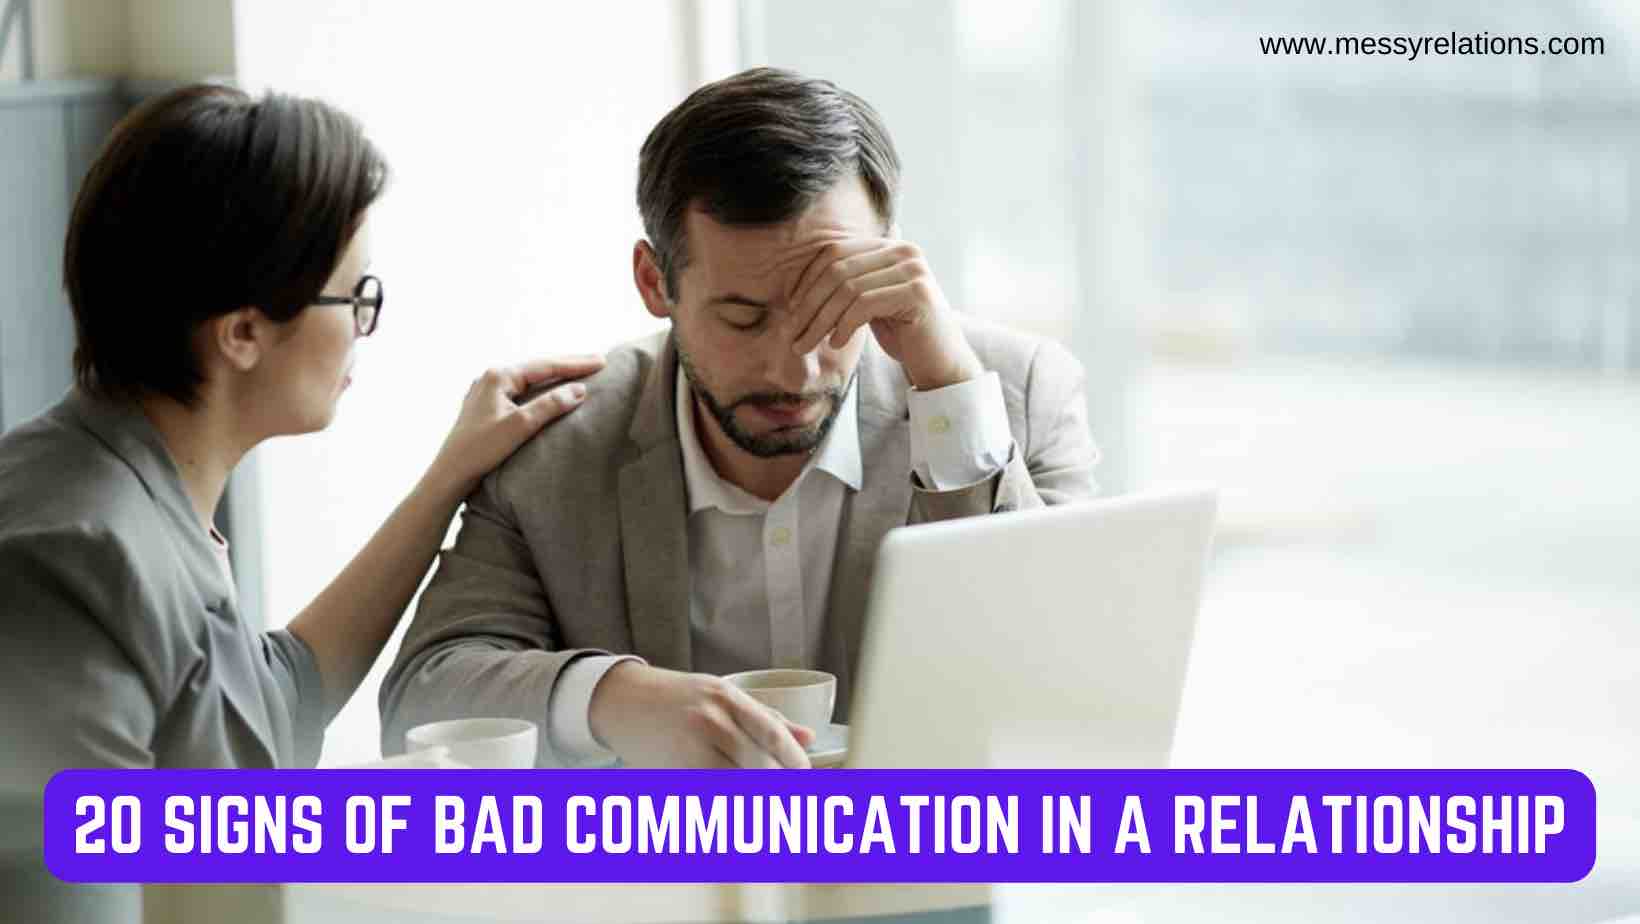 Bad Communication In A Relationship